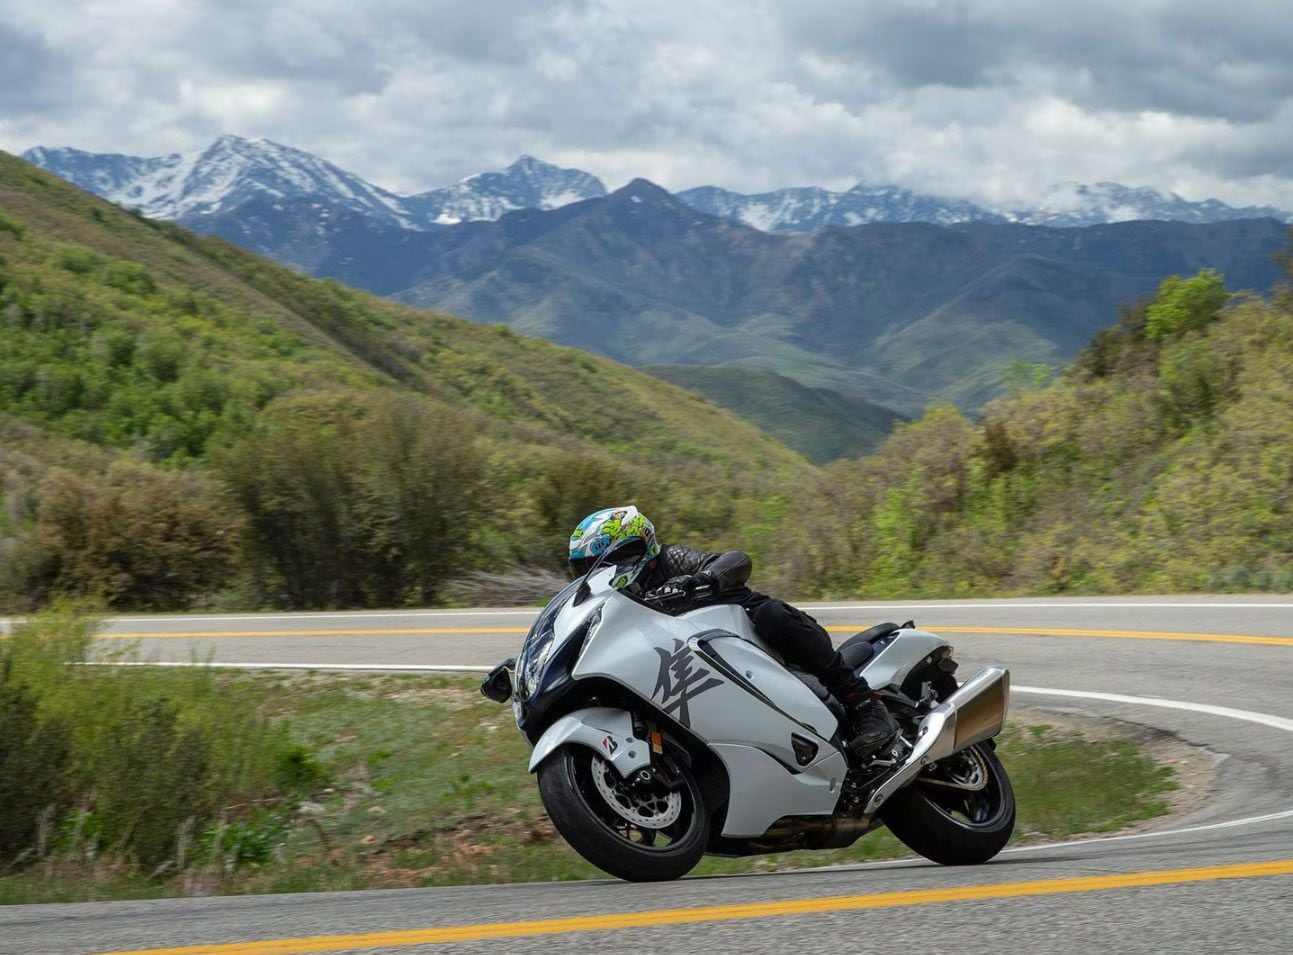 If the Hayabusa is good enough for Spy Barbie, it's good enough for your next road trip.